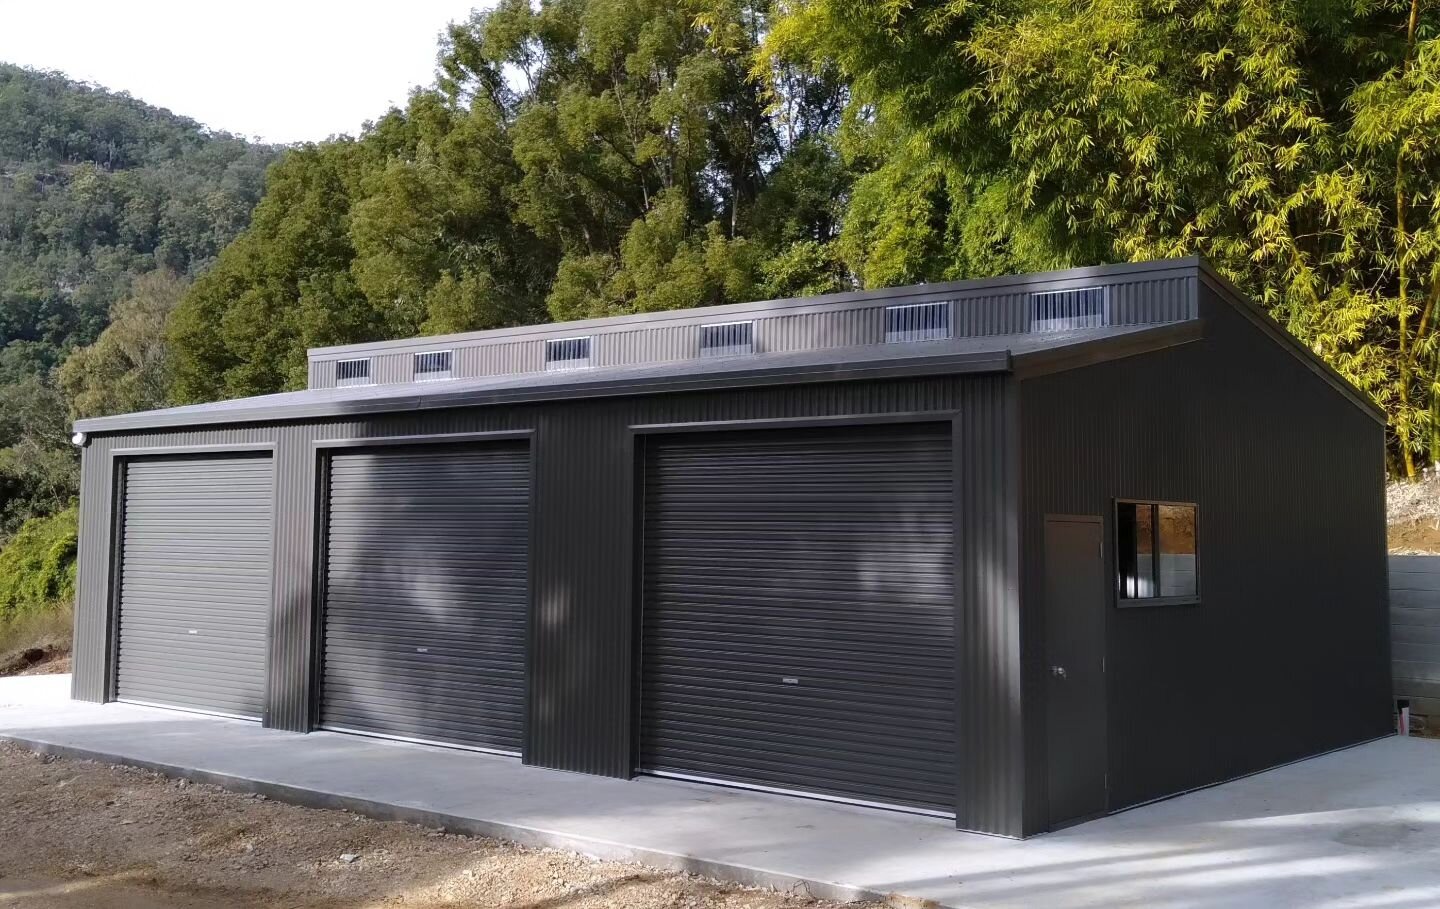 👏 Our clients are thrilled with the result of their straightforward yet stylish triple garage, which showcases an aesthetically pleasing &amp; functional split skillion roof with polycarbonate light panels.

Project Details:
🛠 Murwillumbah
🛠 Size 